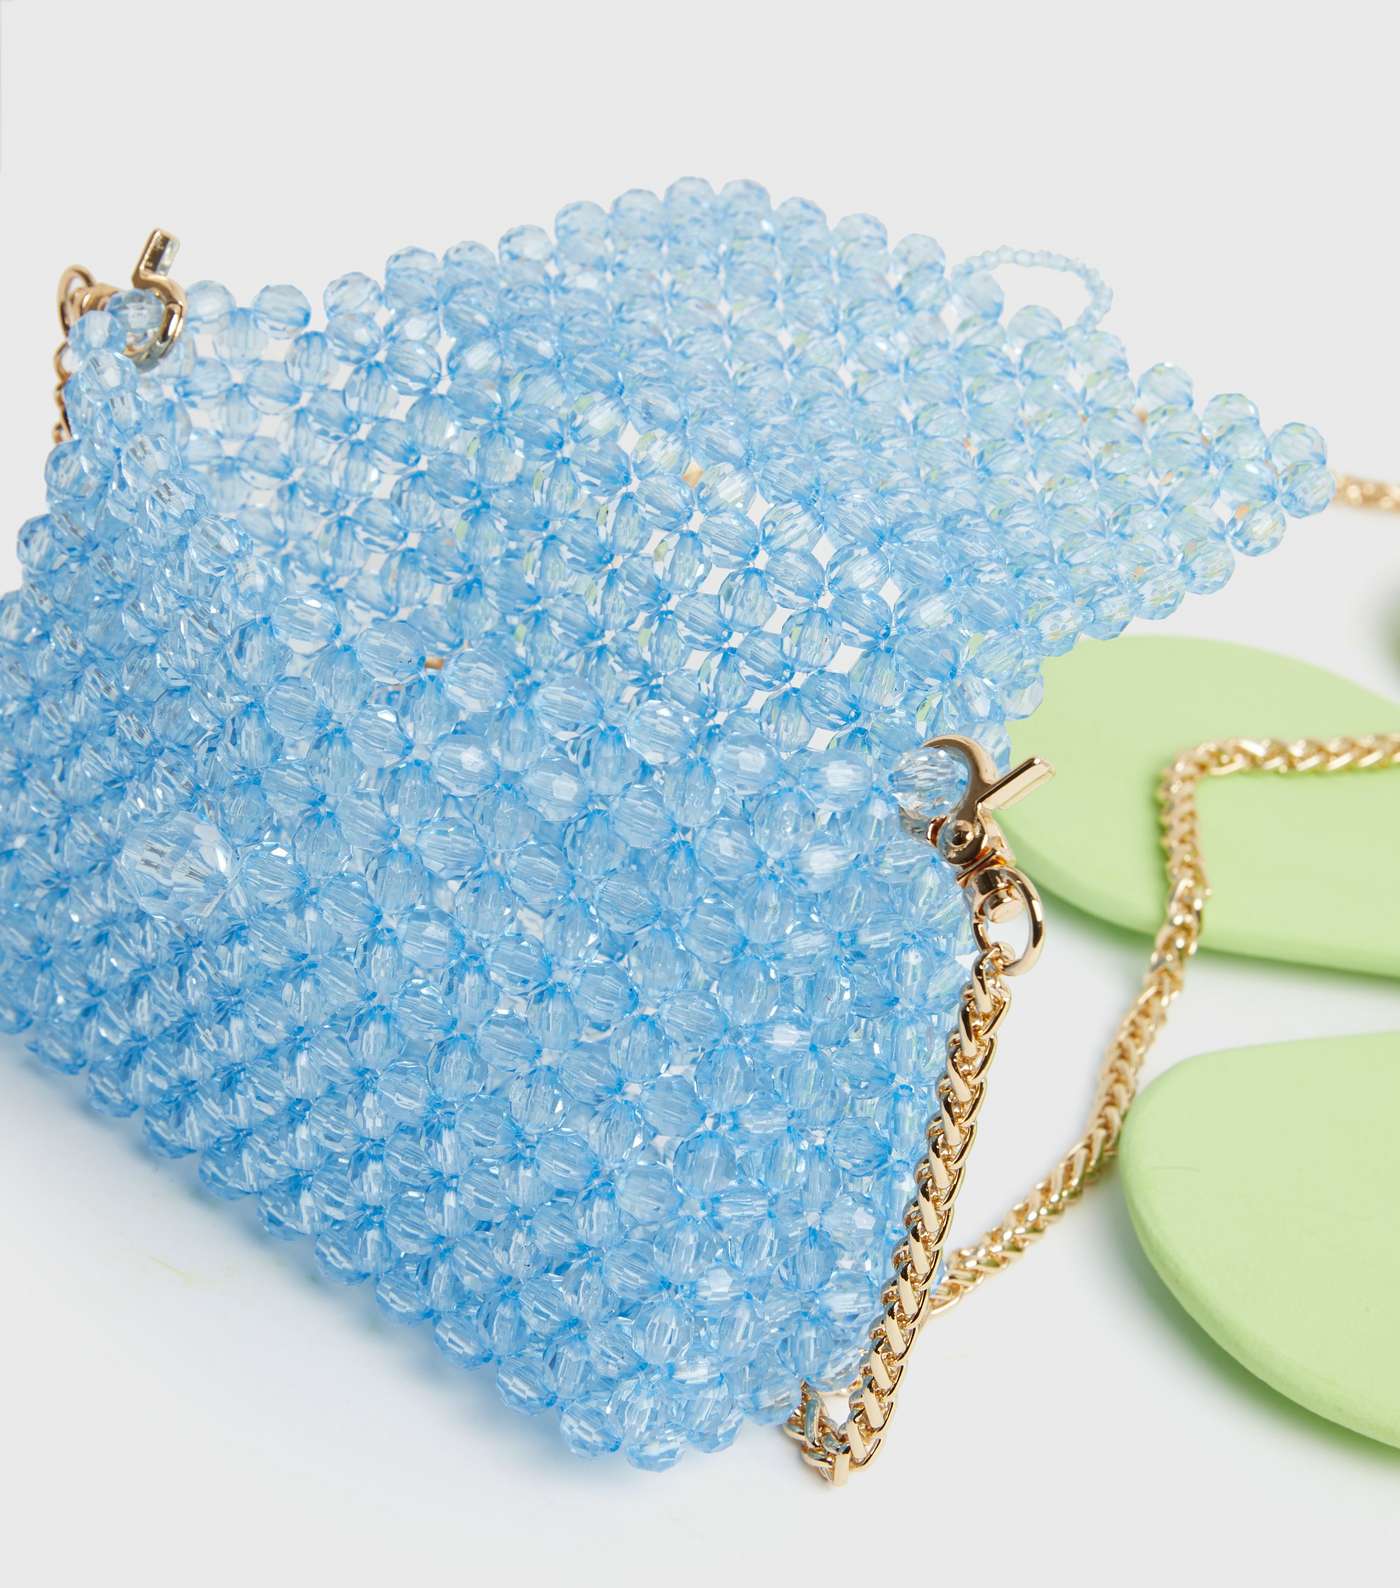 Made for the Wild Ones Blue Beaded Cross Body Bag Image 3